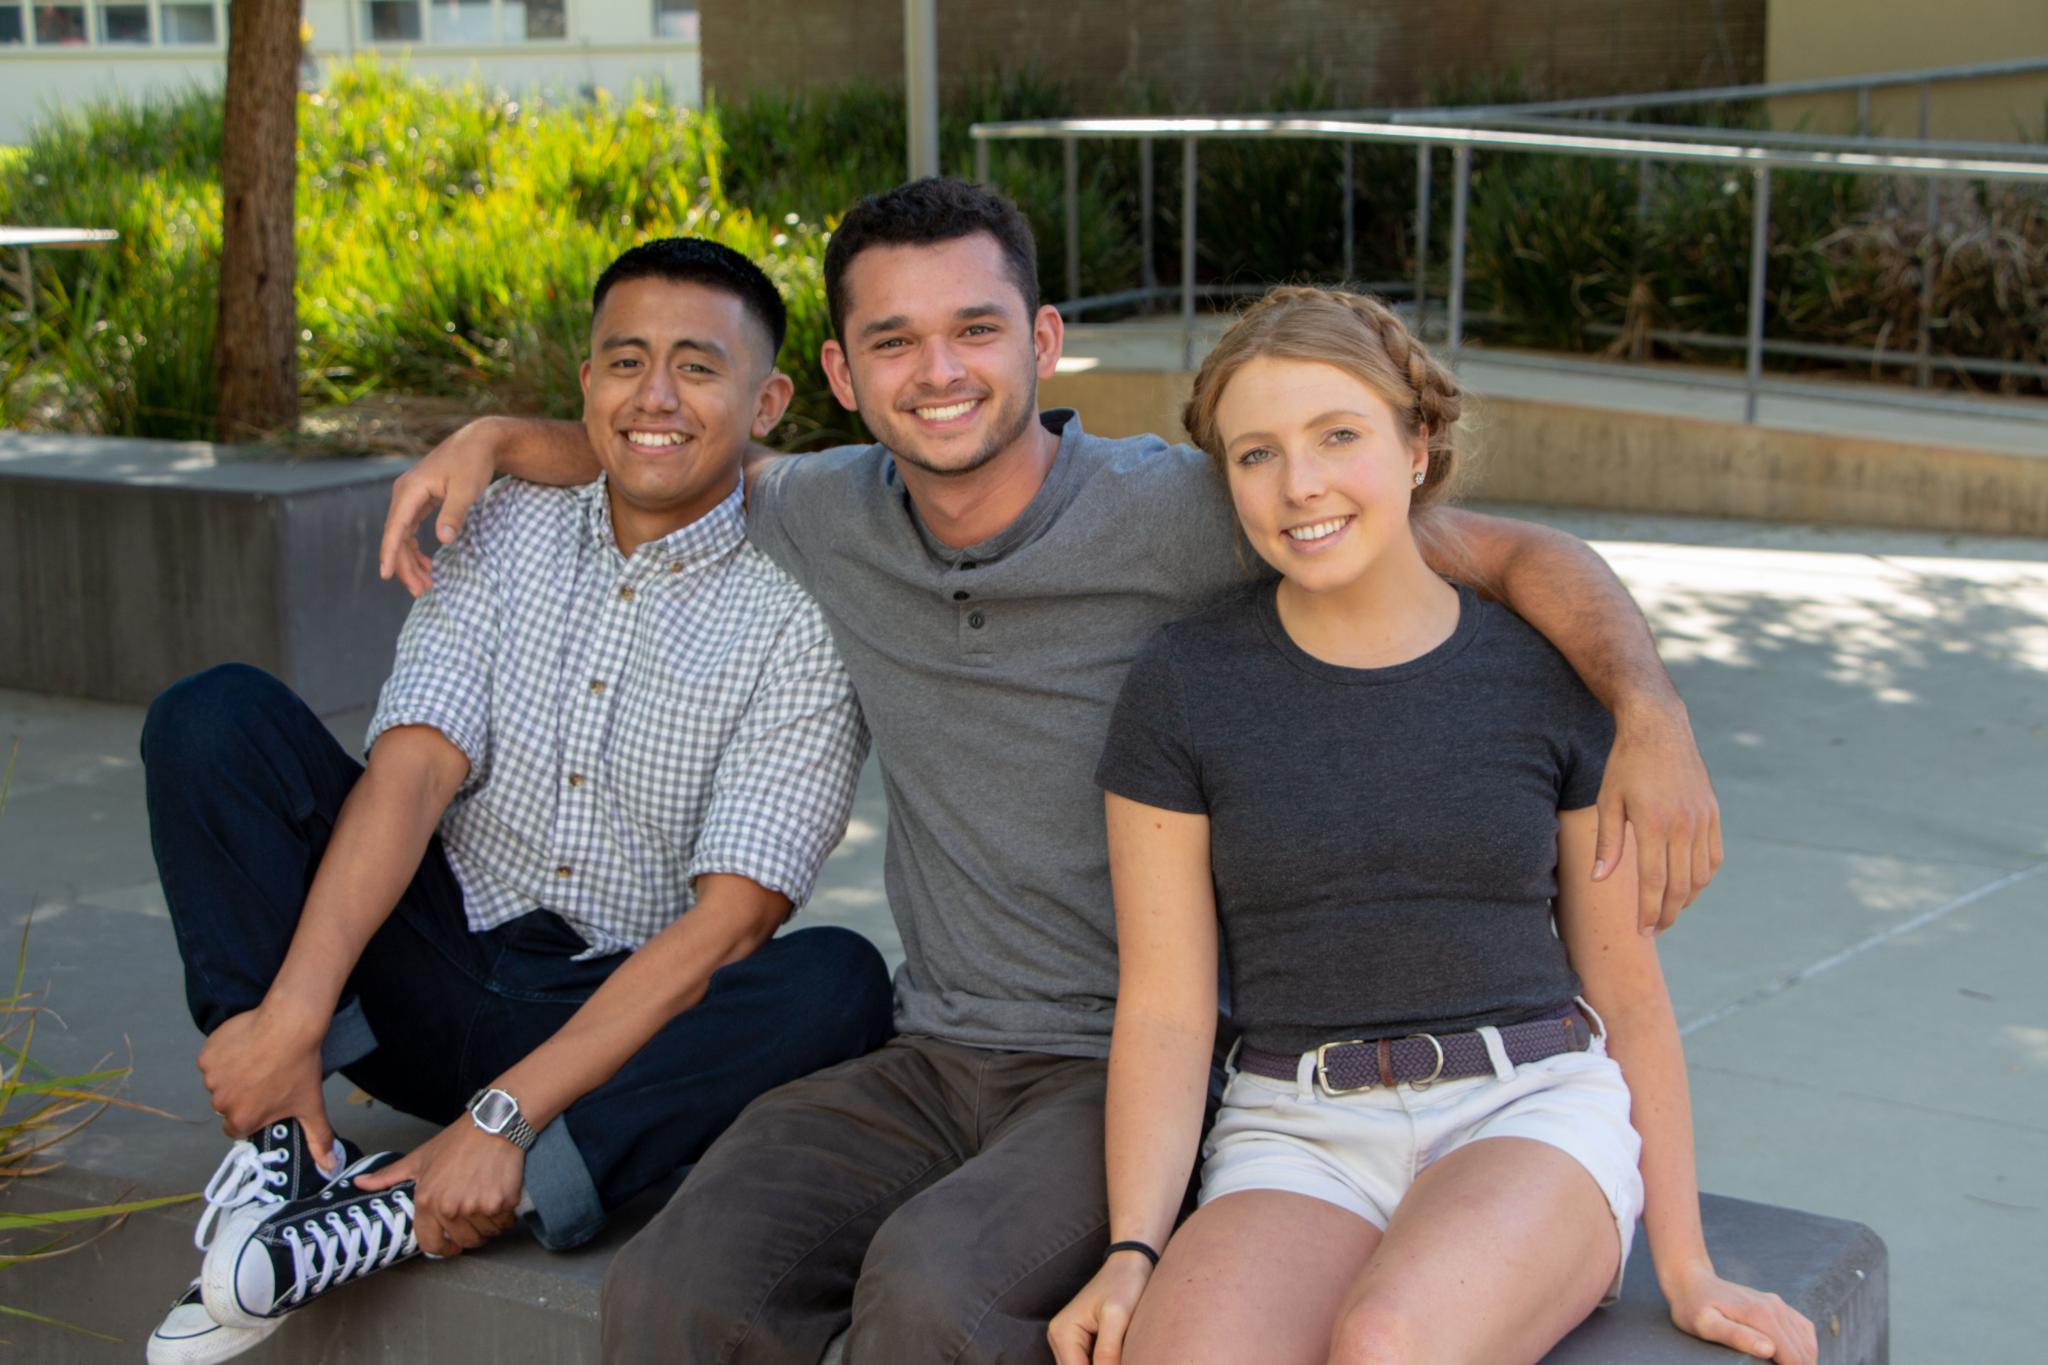 Three people, two men and a woman, sit on a bench with their arms around each other. They are part of a group of transfer academic coaches on campus.